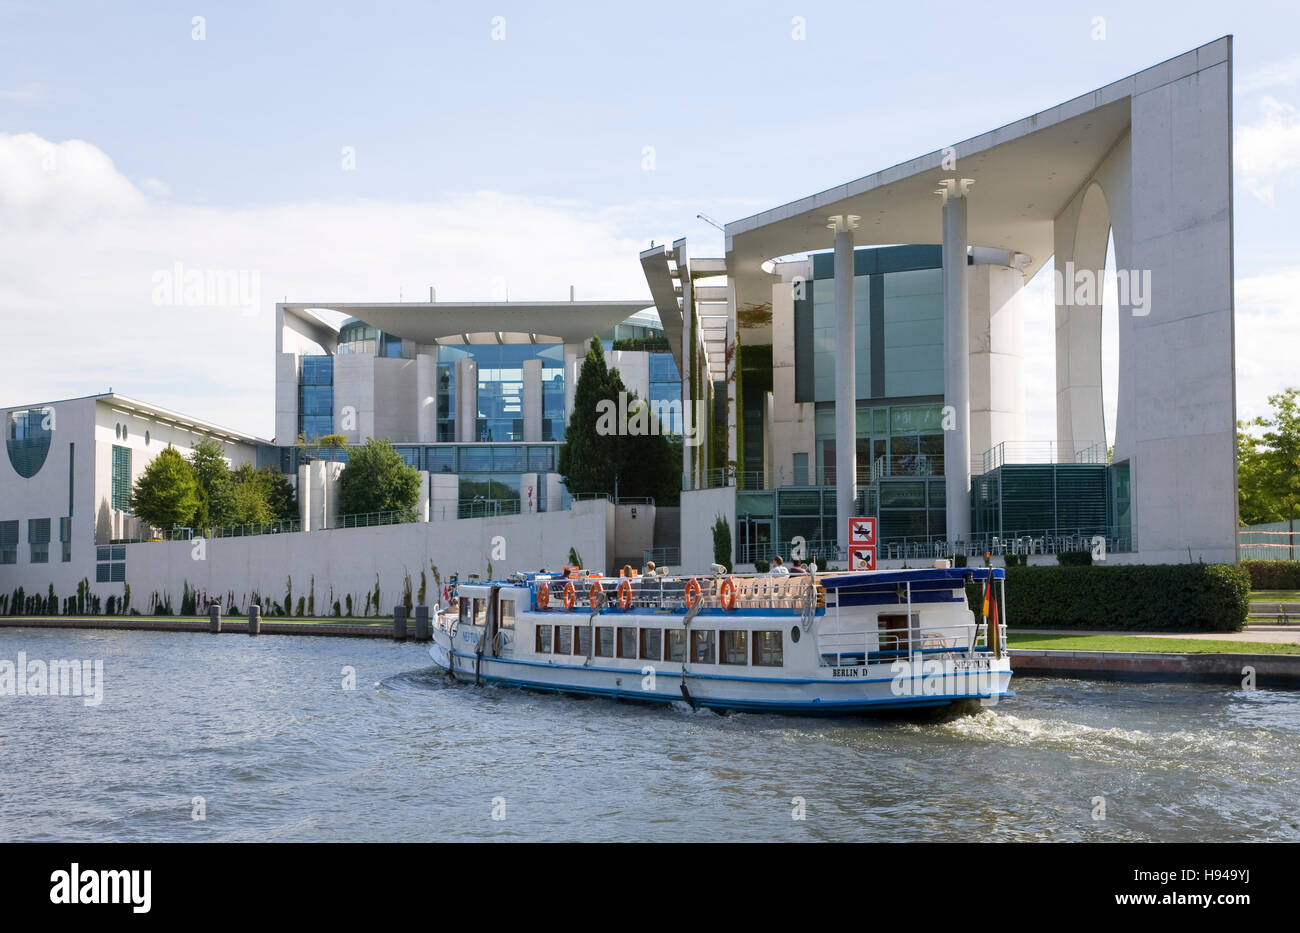 Excursion boat on the Spree river in front of Bundeskanzleramt, Federal Chancellery, government buildings, shipping, Berlin Stock Photo